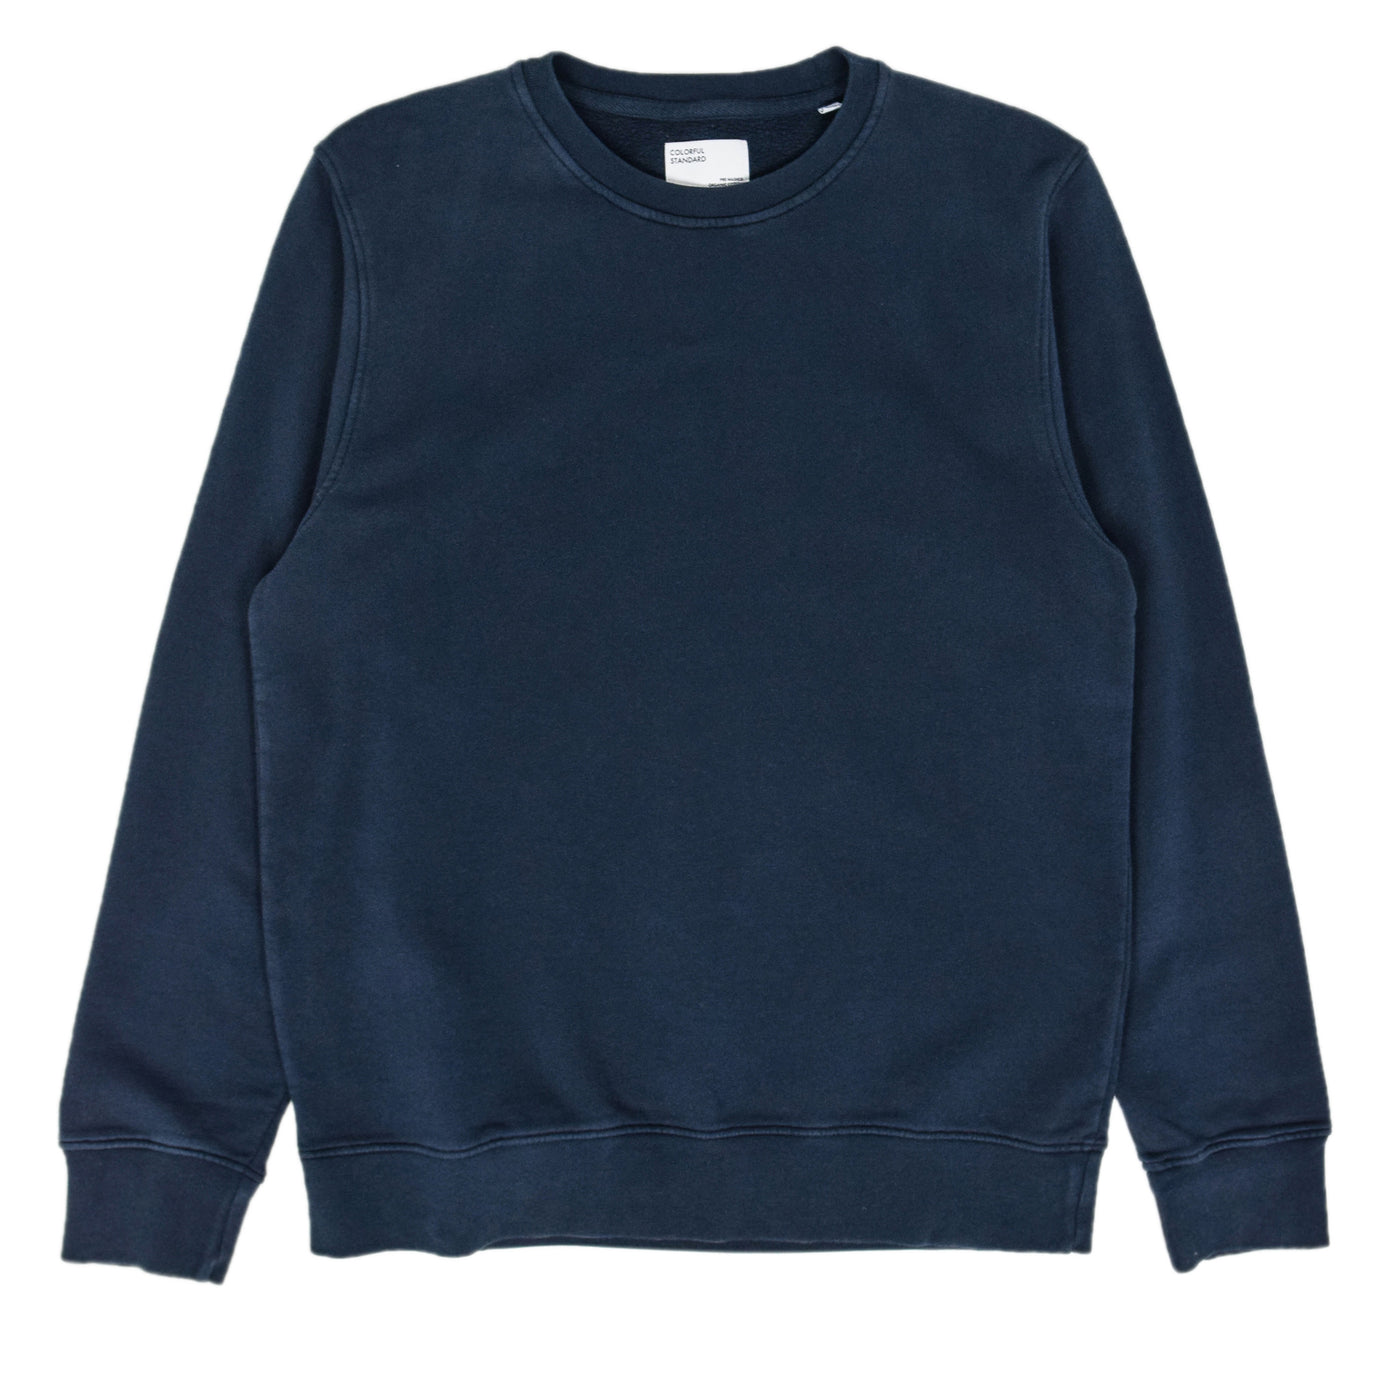 Colorful Standard Crew Sweat Organic Cotton Navy Blue front